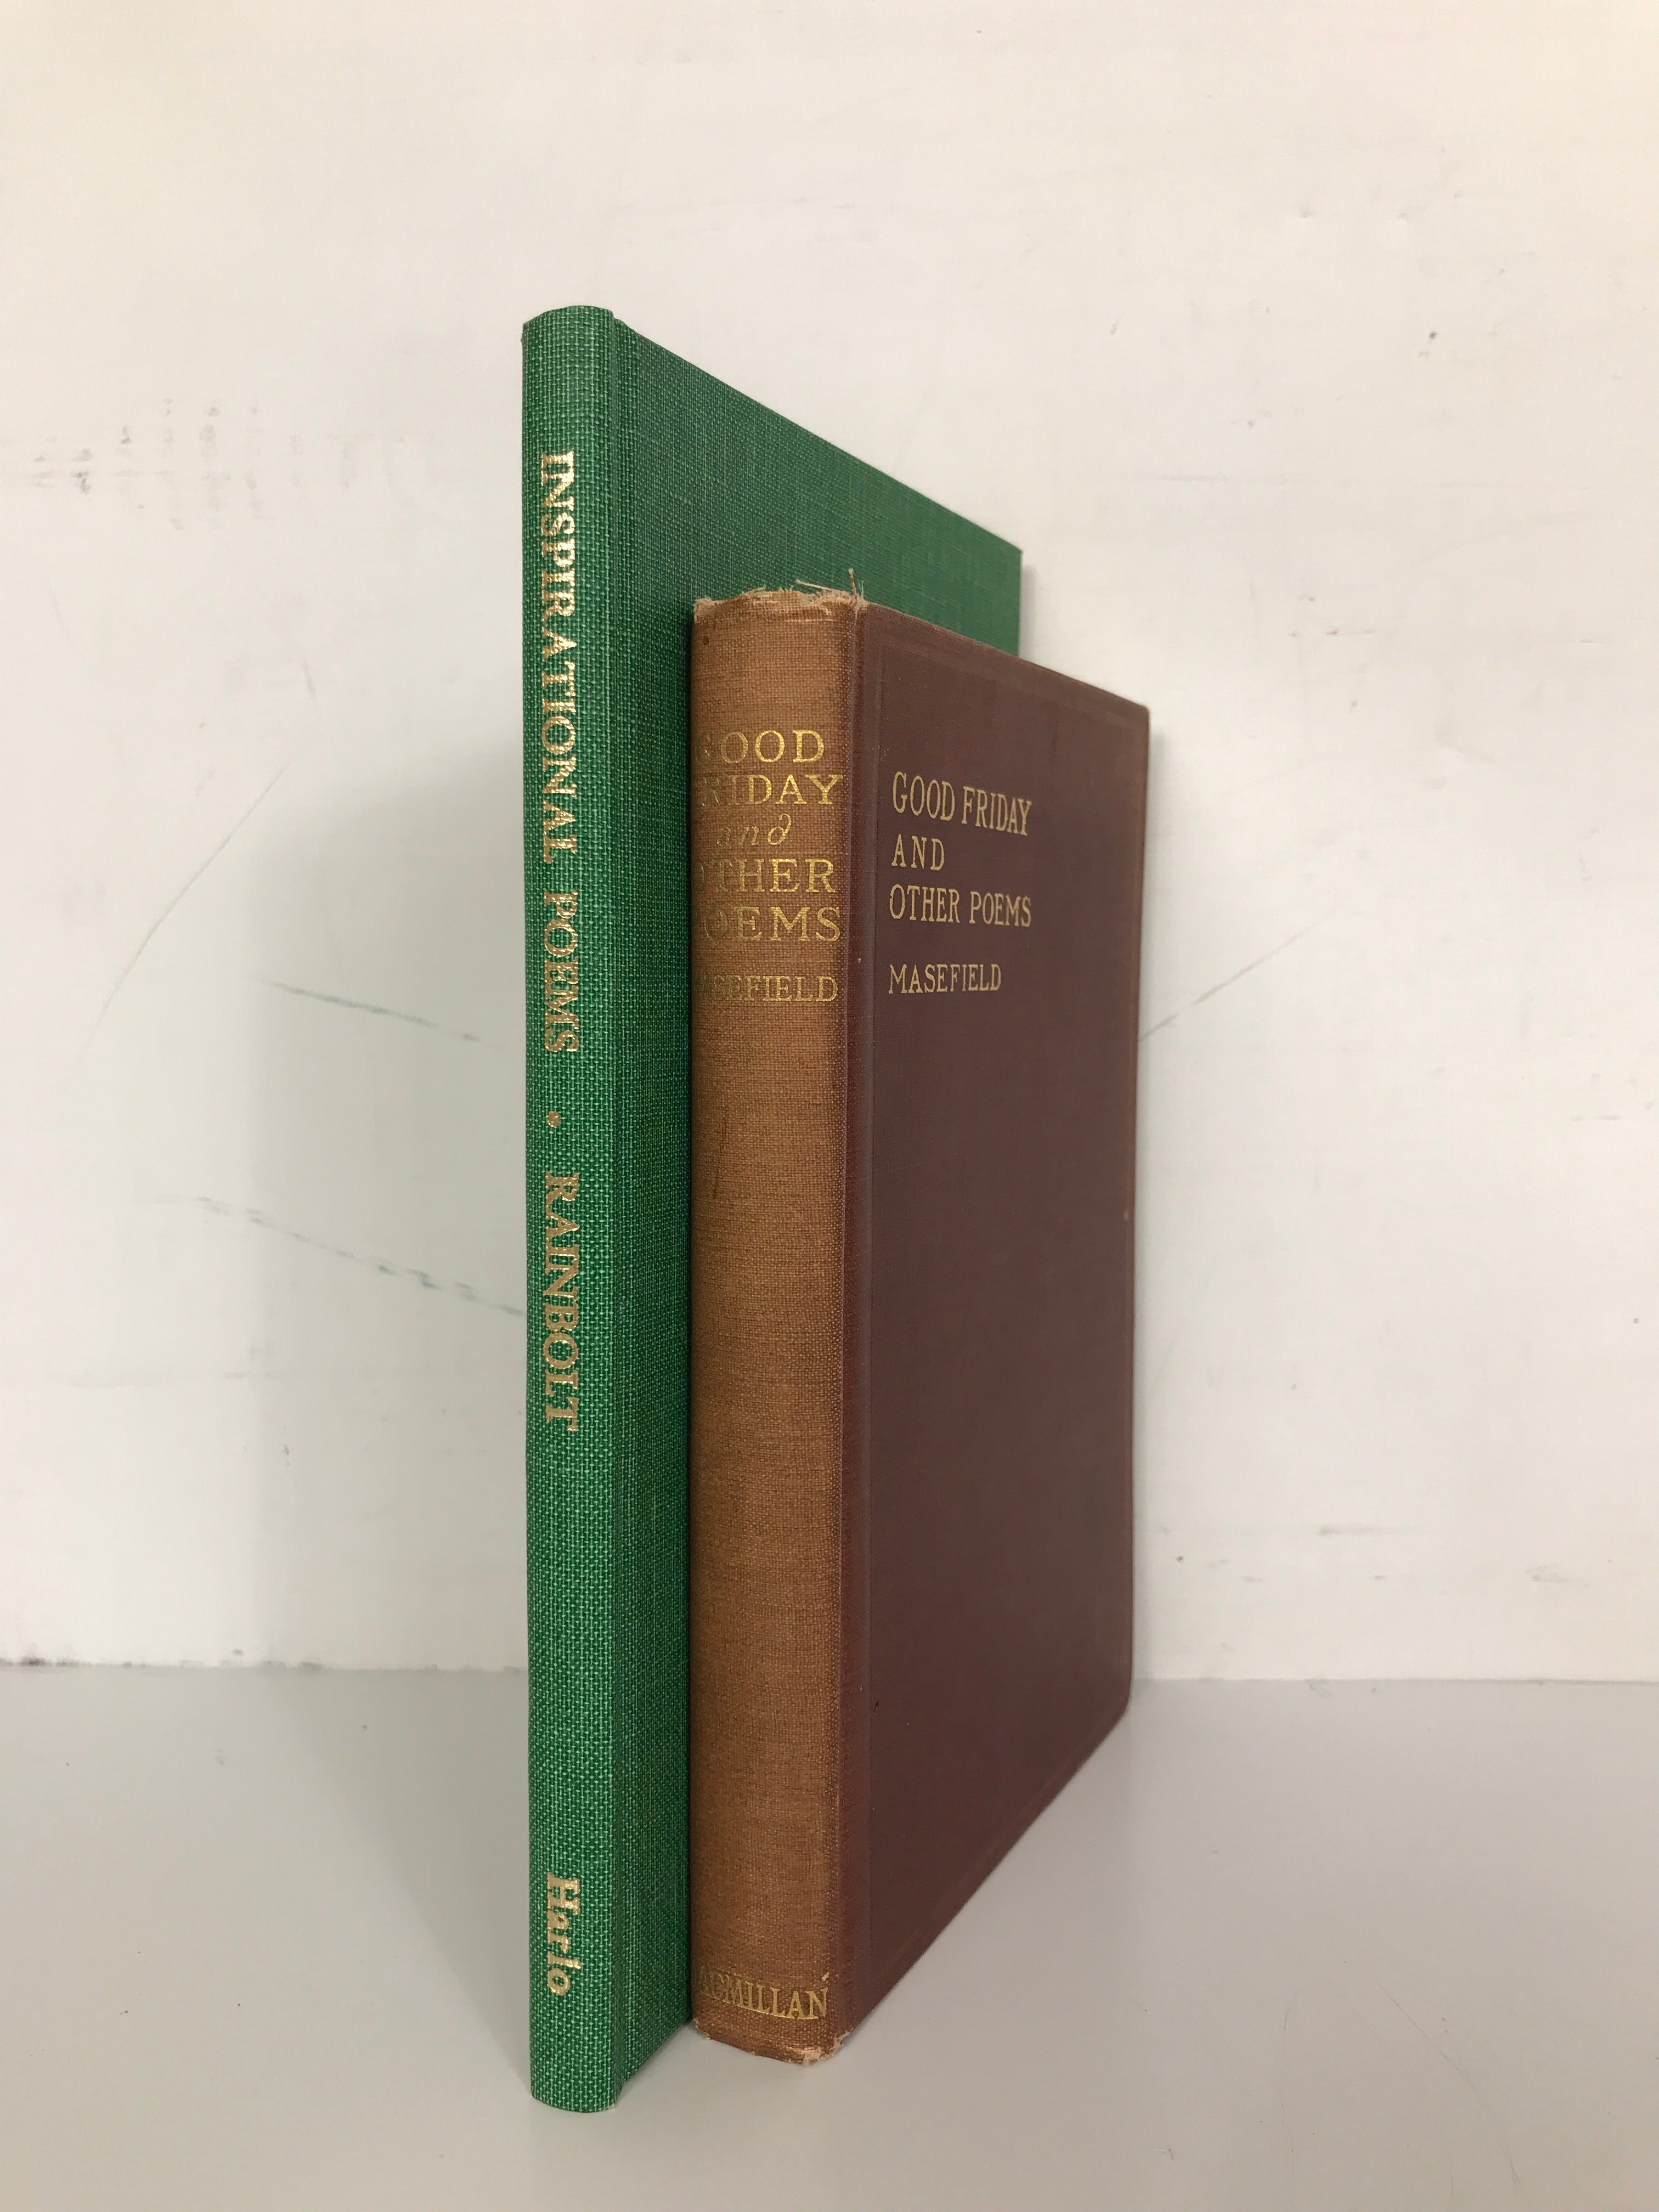 Lot of 2 Poetry Books:1916-1973 HC